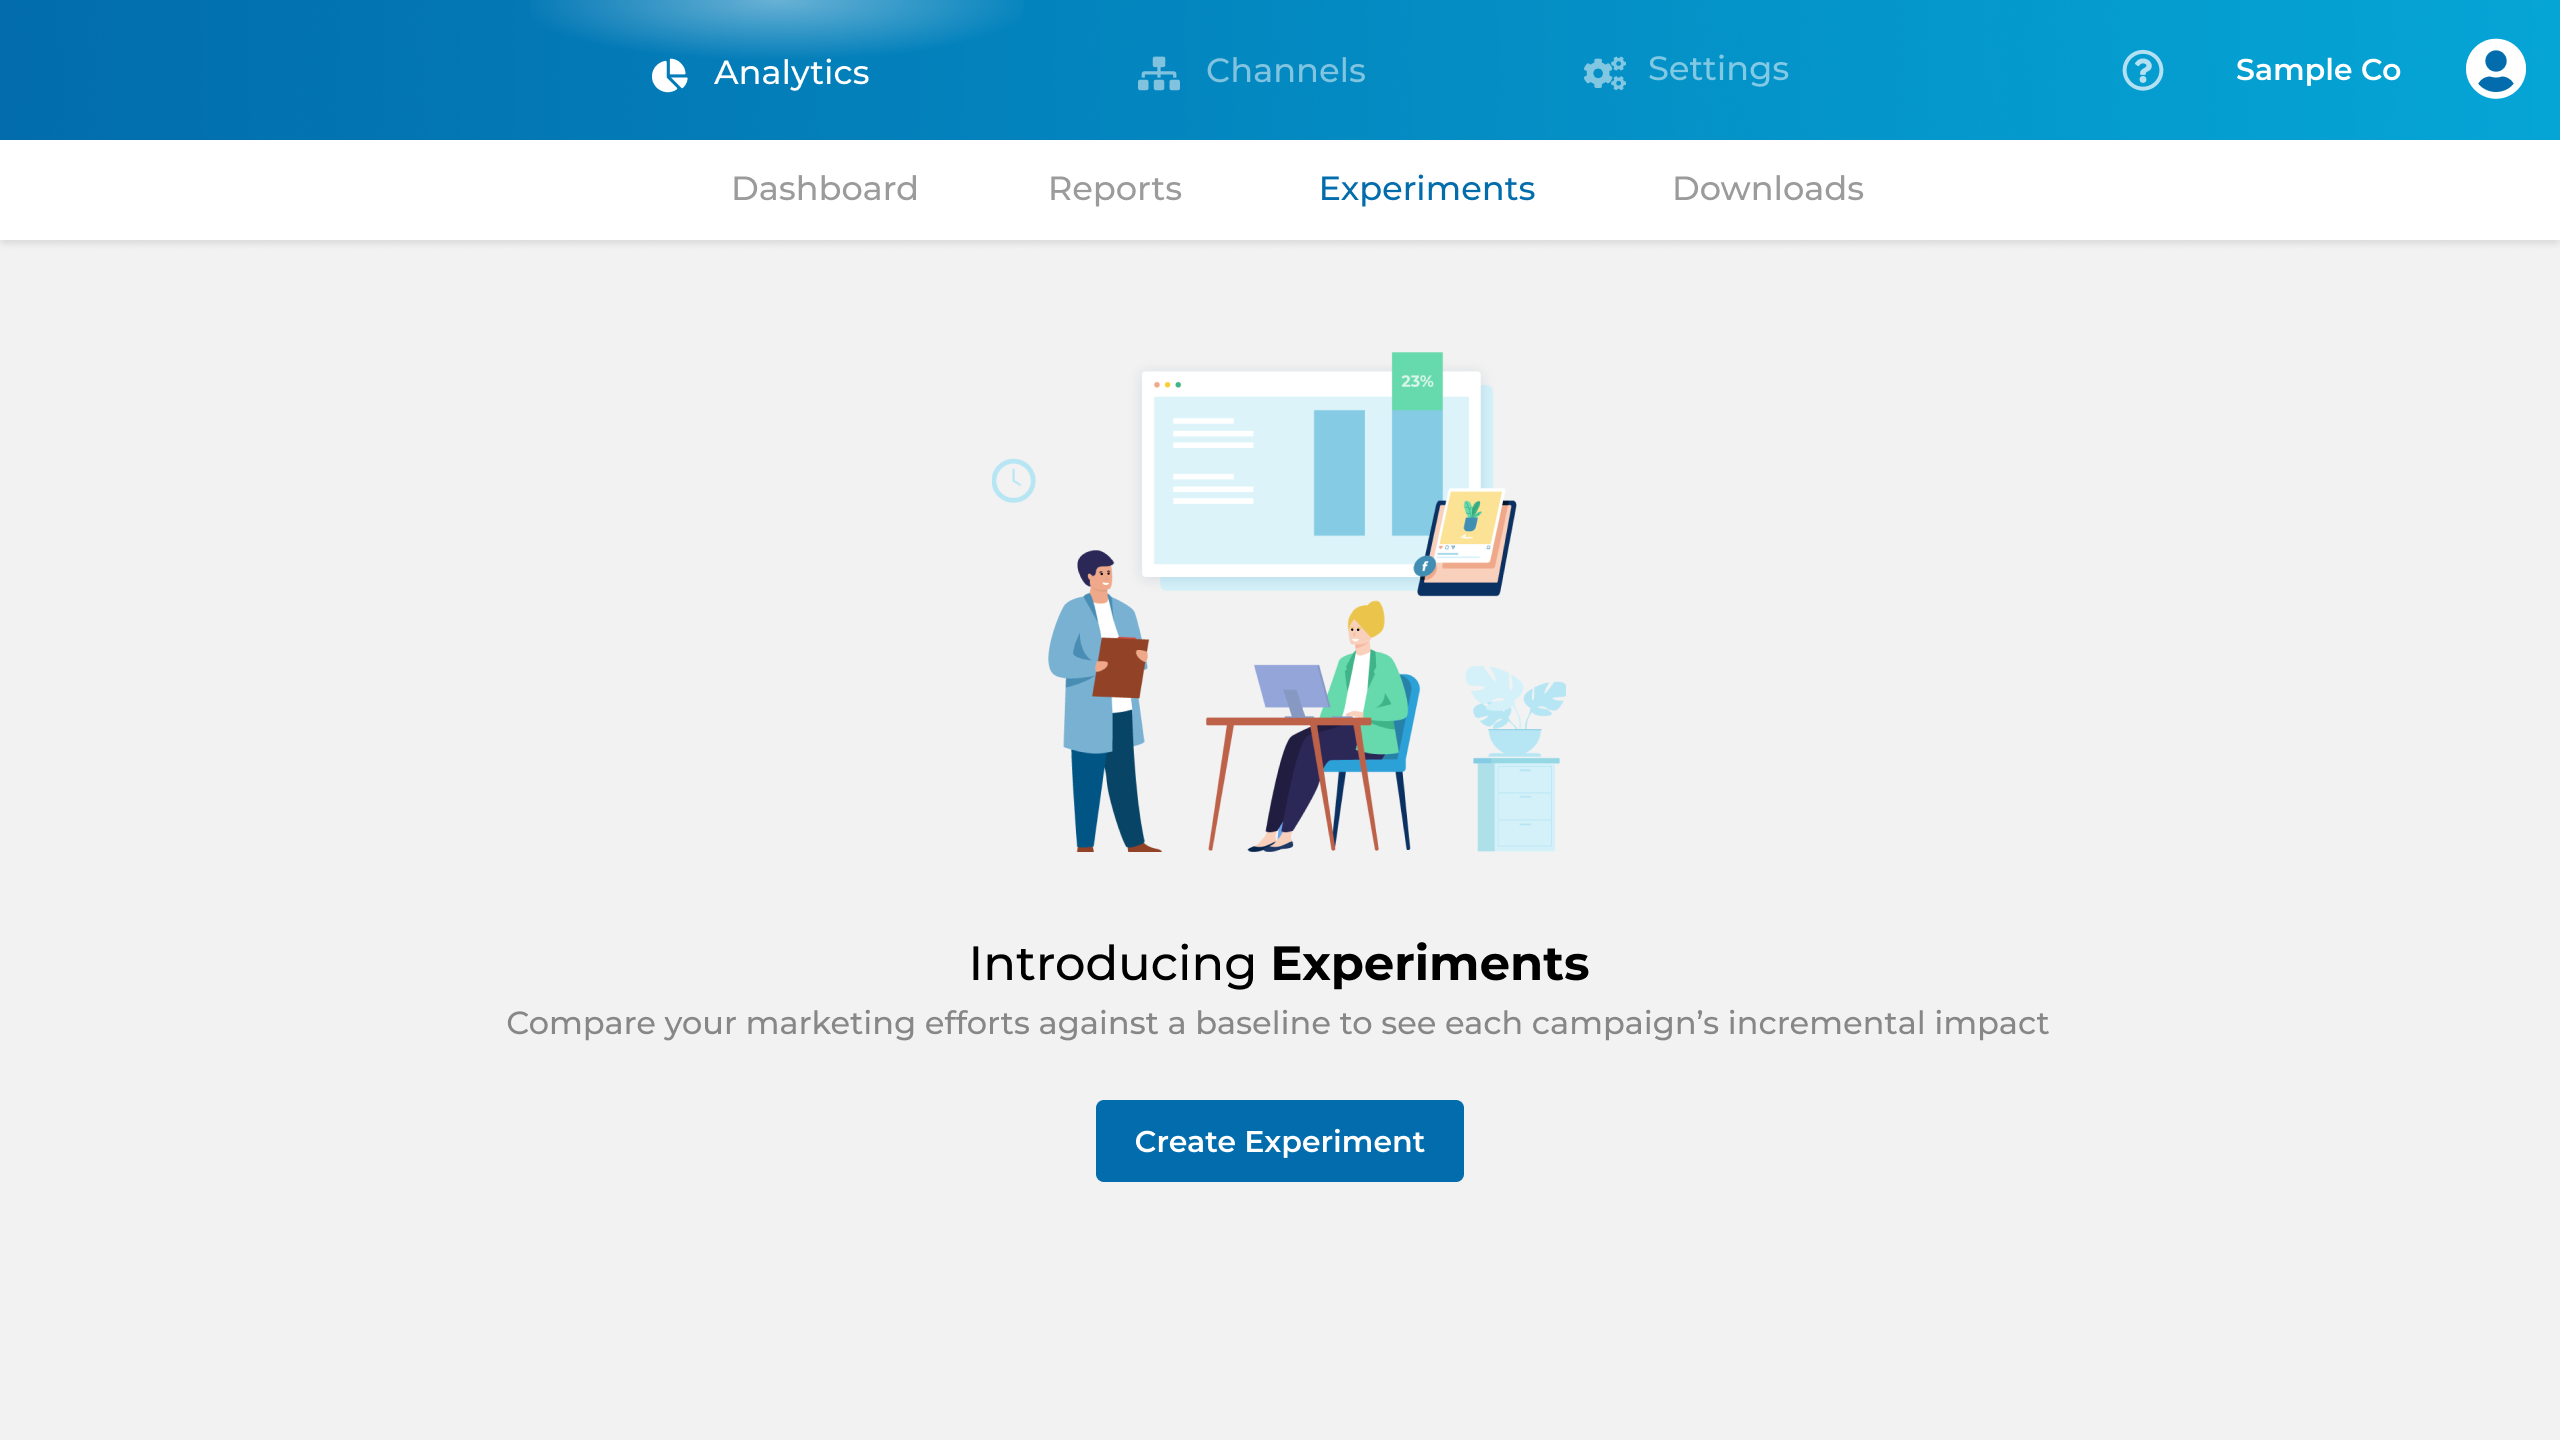 Introducing Experiments dashboard